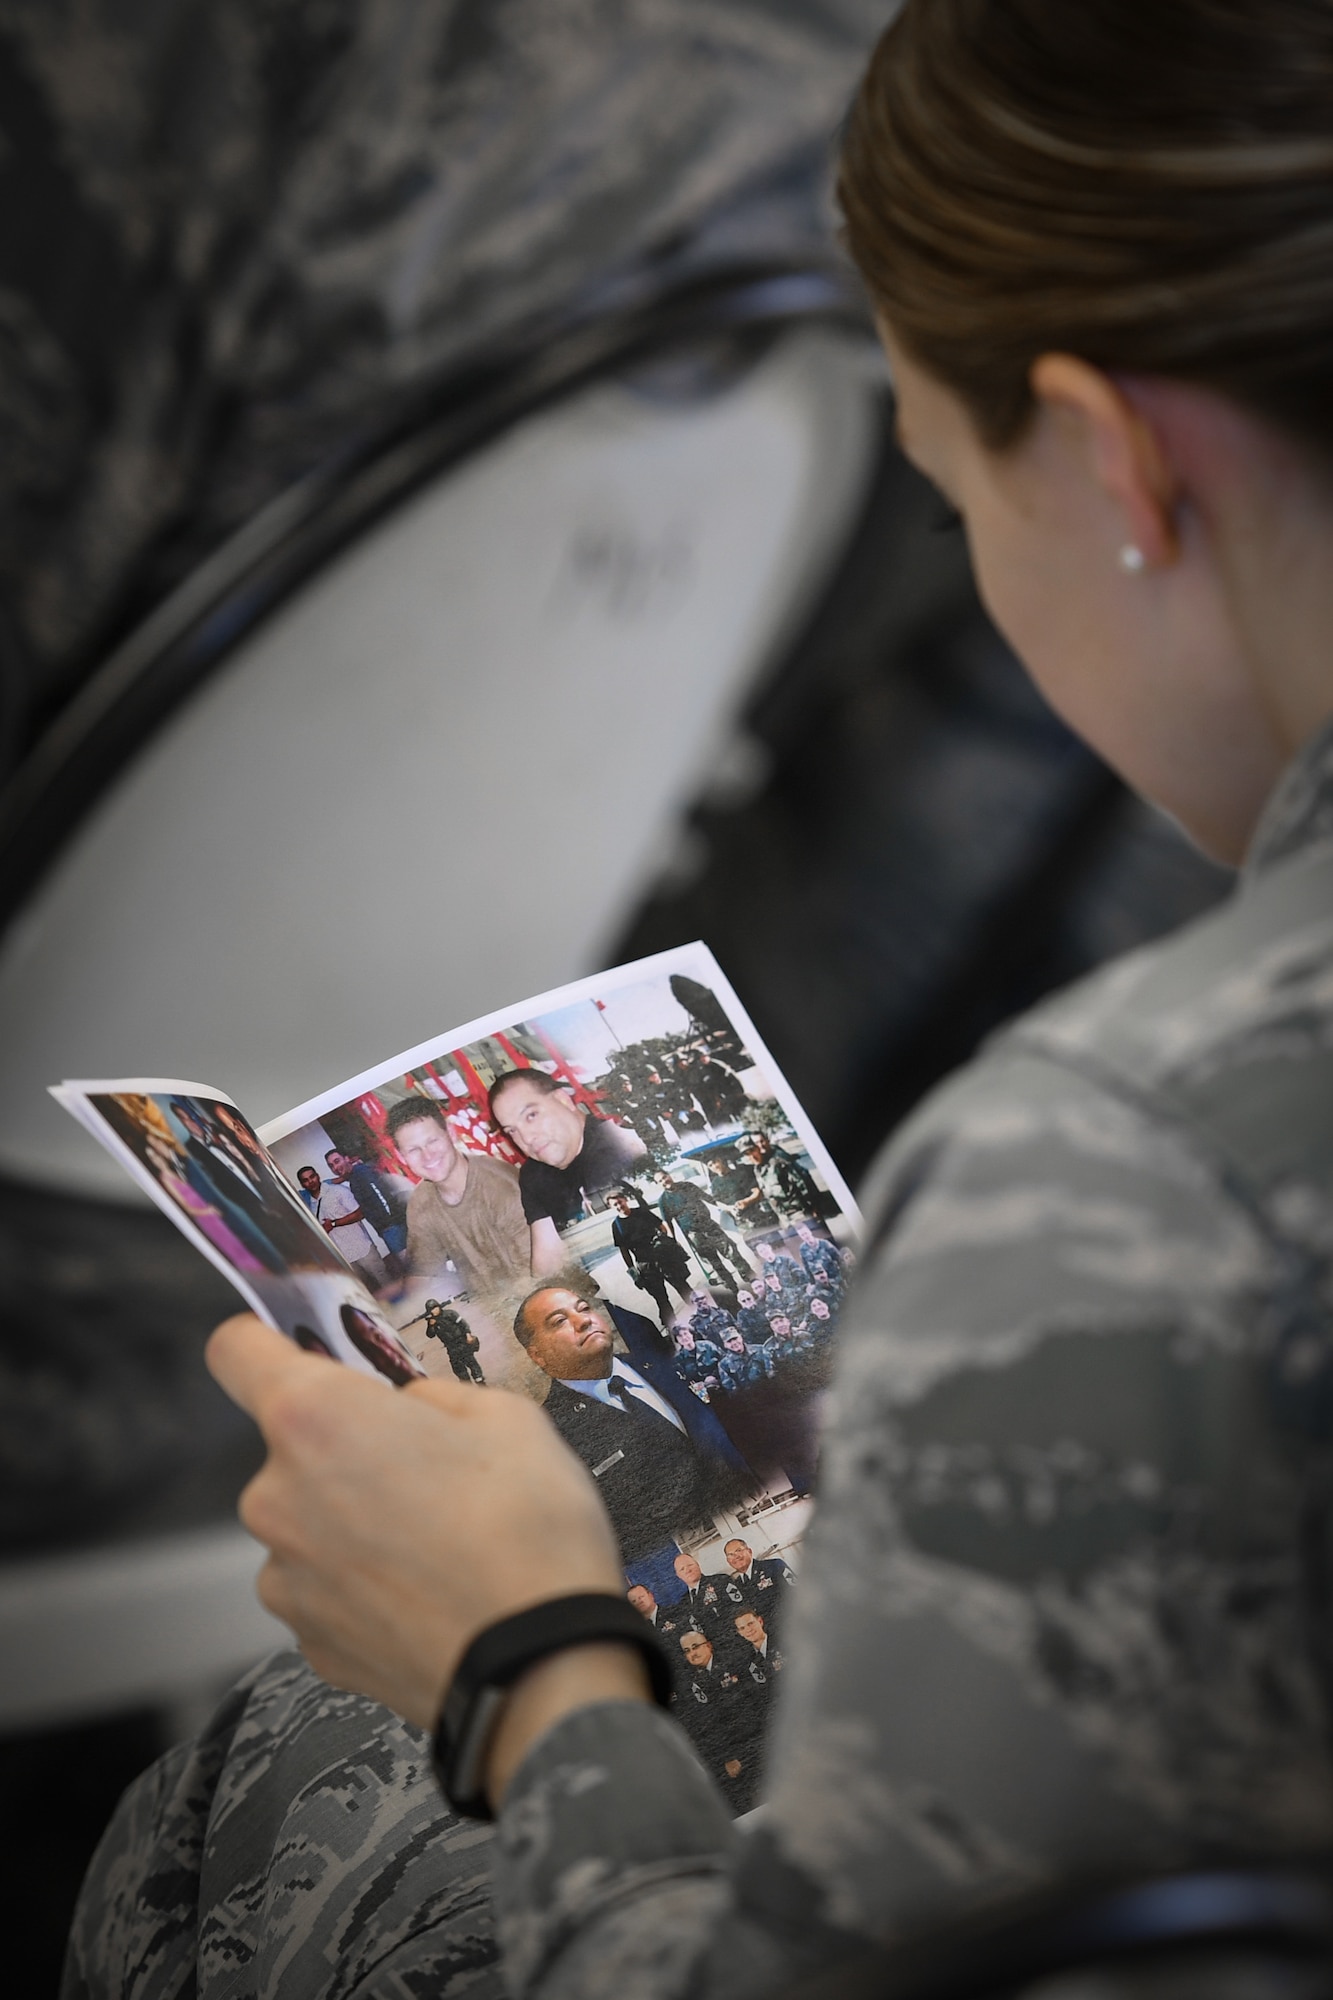 1st Lt. Melissa Spencer, wing executive officer, looks at images of Command Chief Master Sgt. George B. Longoria, during a retirement ceremony honoring Longoria at Joint Base San Antonio-Lackland, Texas, Feb. 25, 2017. Longoria retires after 35 years of service with the 149th Fighter Wing, Texas Air National Guard. (U.S. Air National Guard photo by Tech. Sgt. Eric L. Wilson)